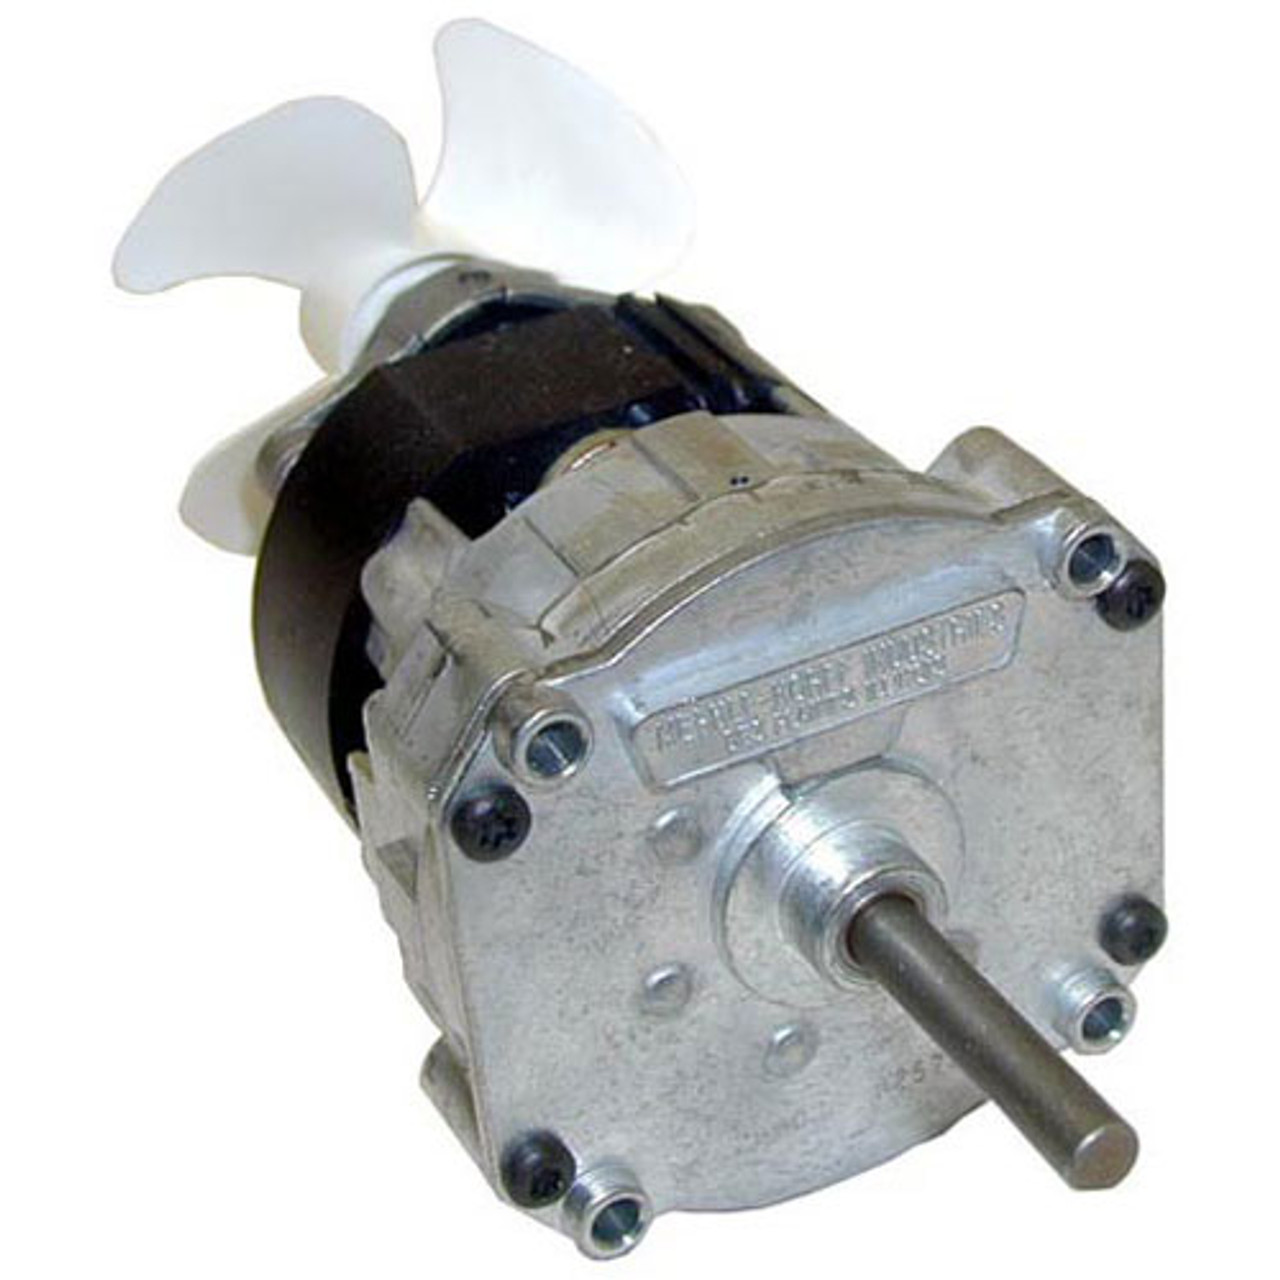 Gear Motor 230V, 6.3 Rpm - Replacement Part For Hatco 02-12-021